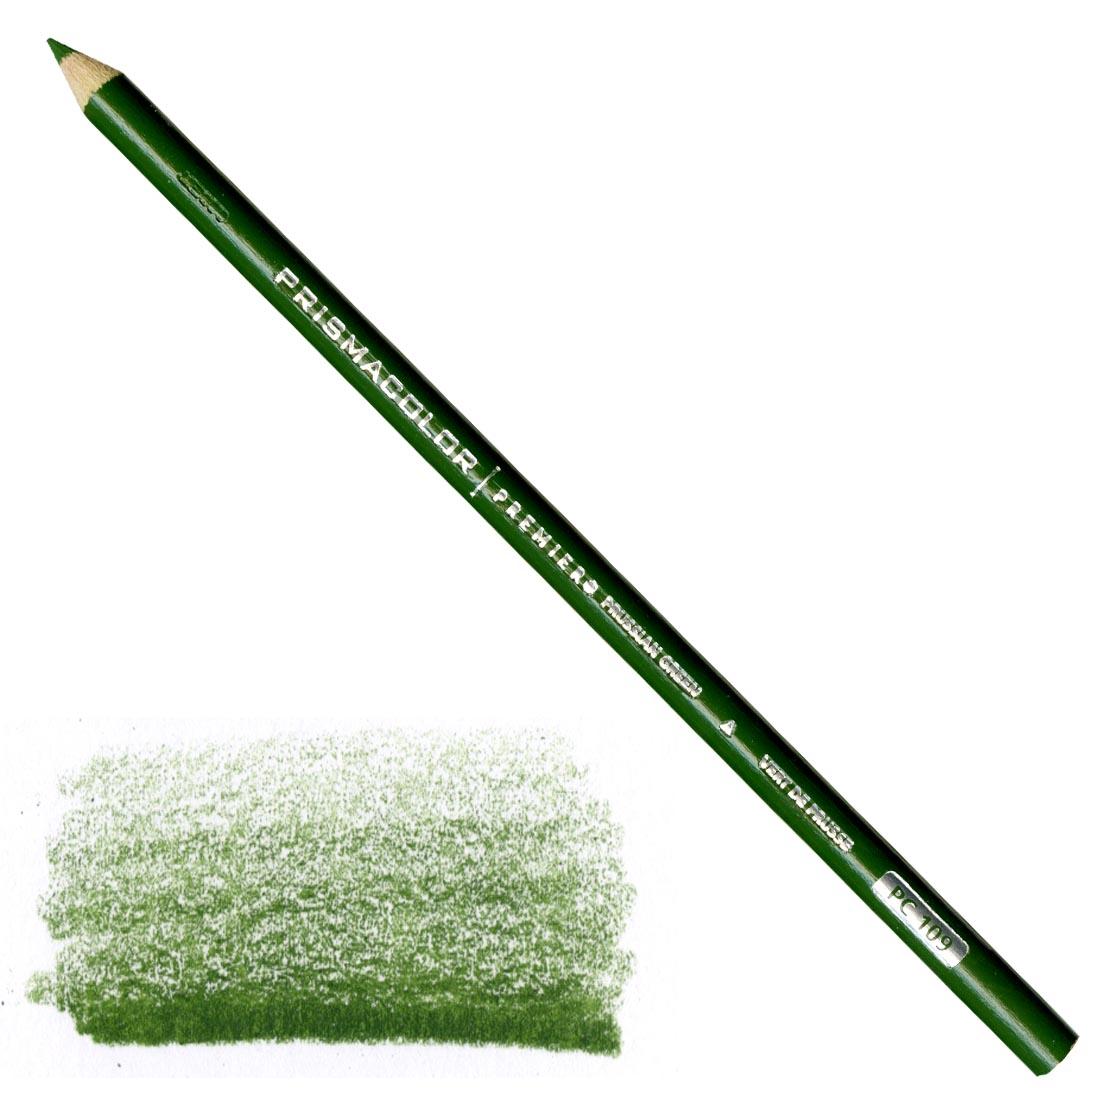 Prussian Green Prismacolor Premier Colored Pencil with a sample colored swatch